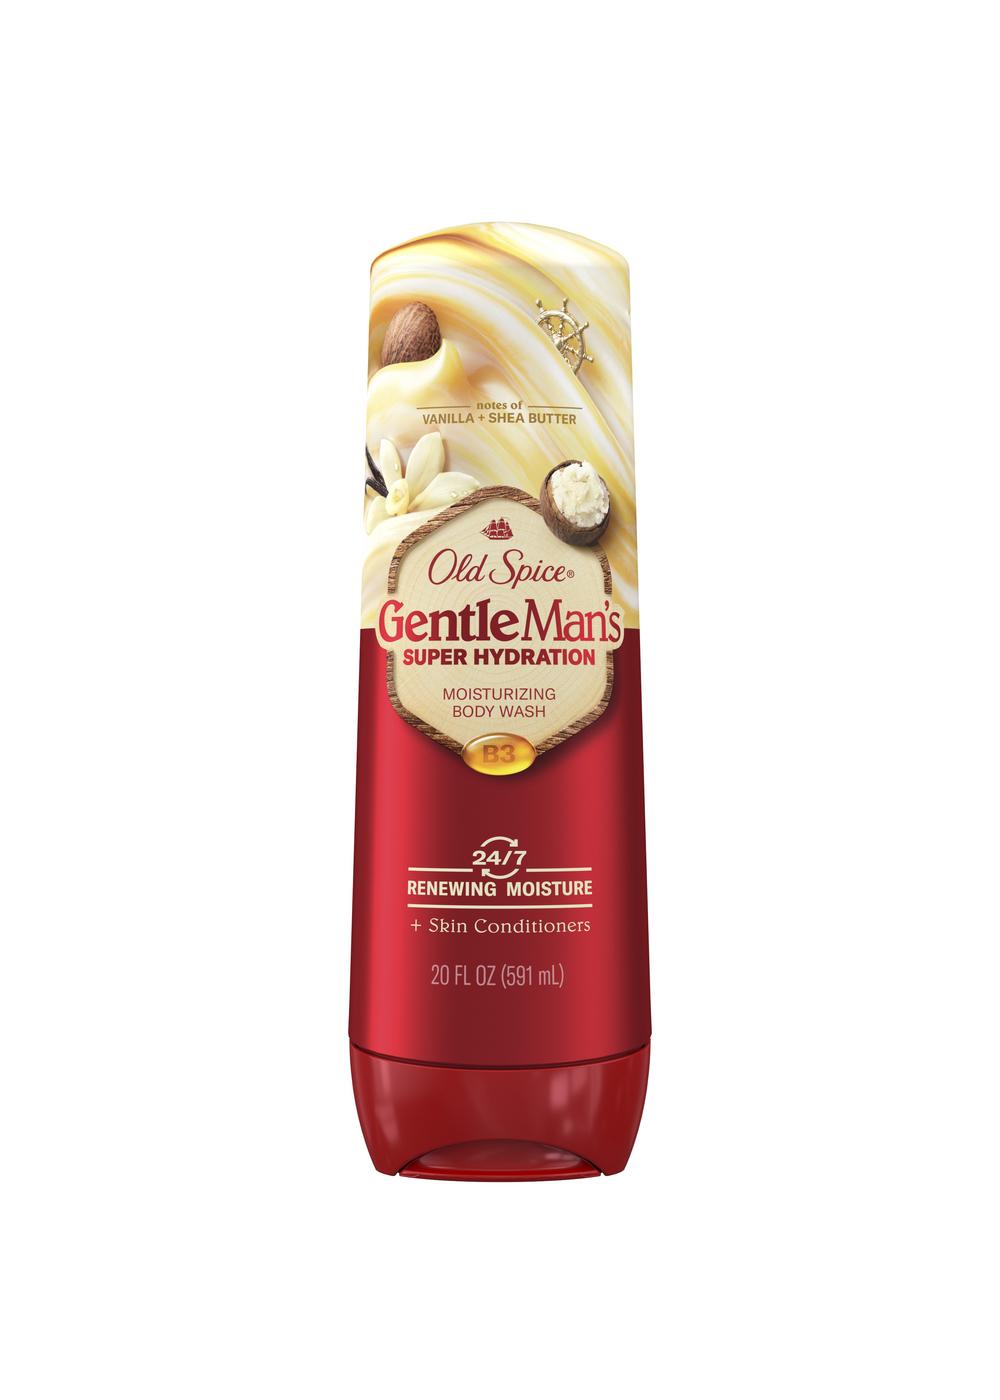 Old Spice GentleMan's Body Wash - Vanilla + Shea Butter; image 1 of 2